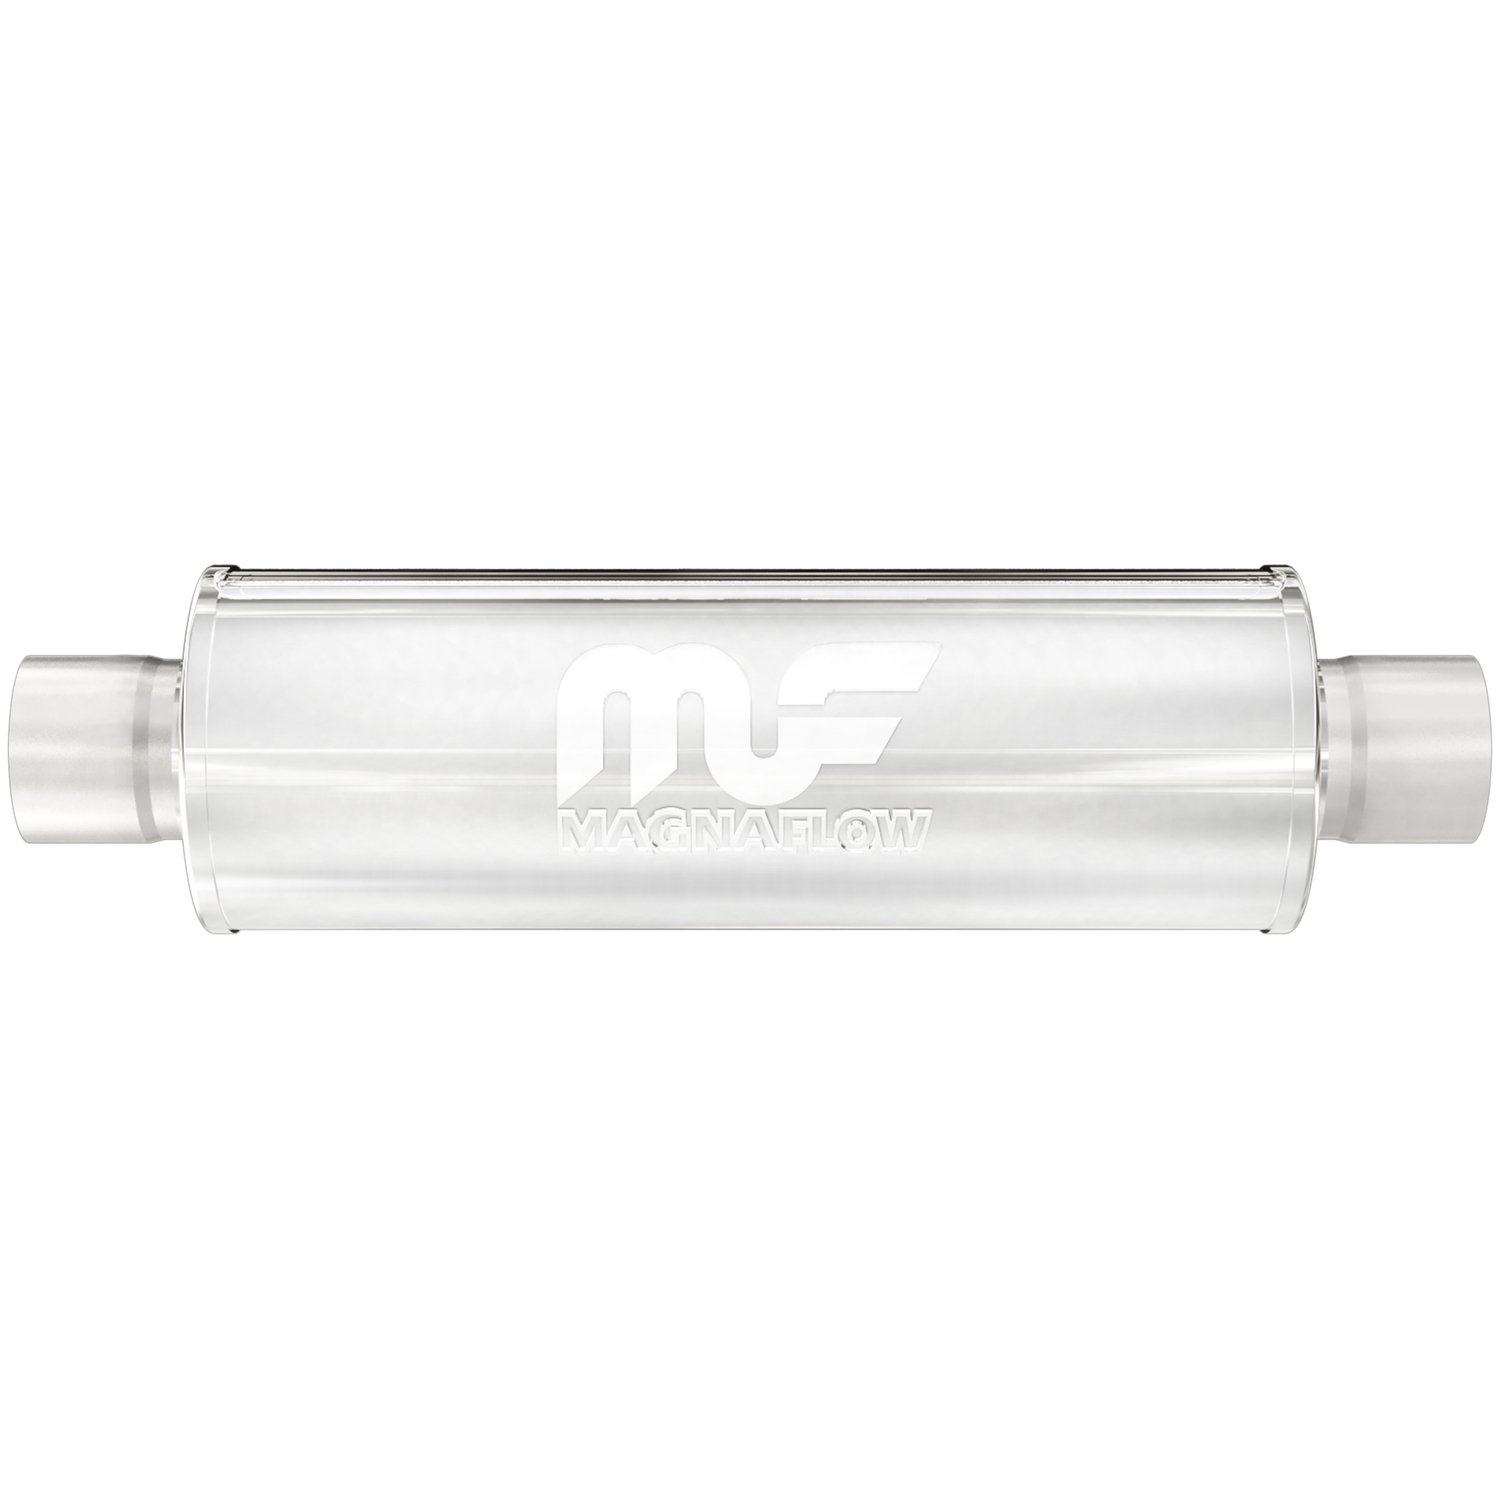 4" Round Muffler Center In/Center Out: 2.25" Body Length: 18" Overall Length: 24" Core Size: 2.5" Satin Finish